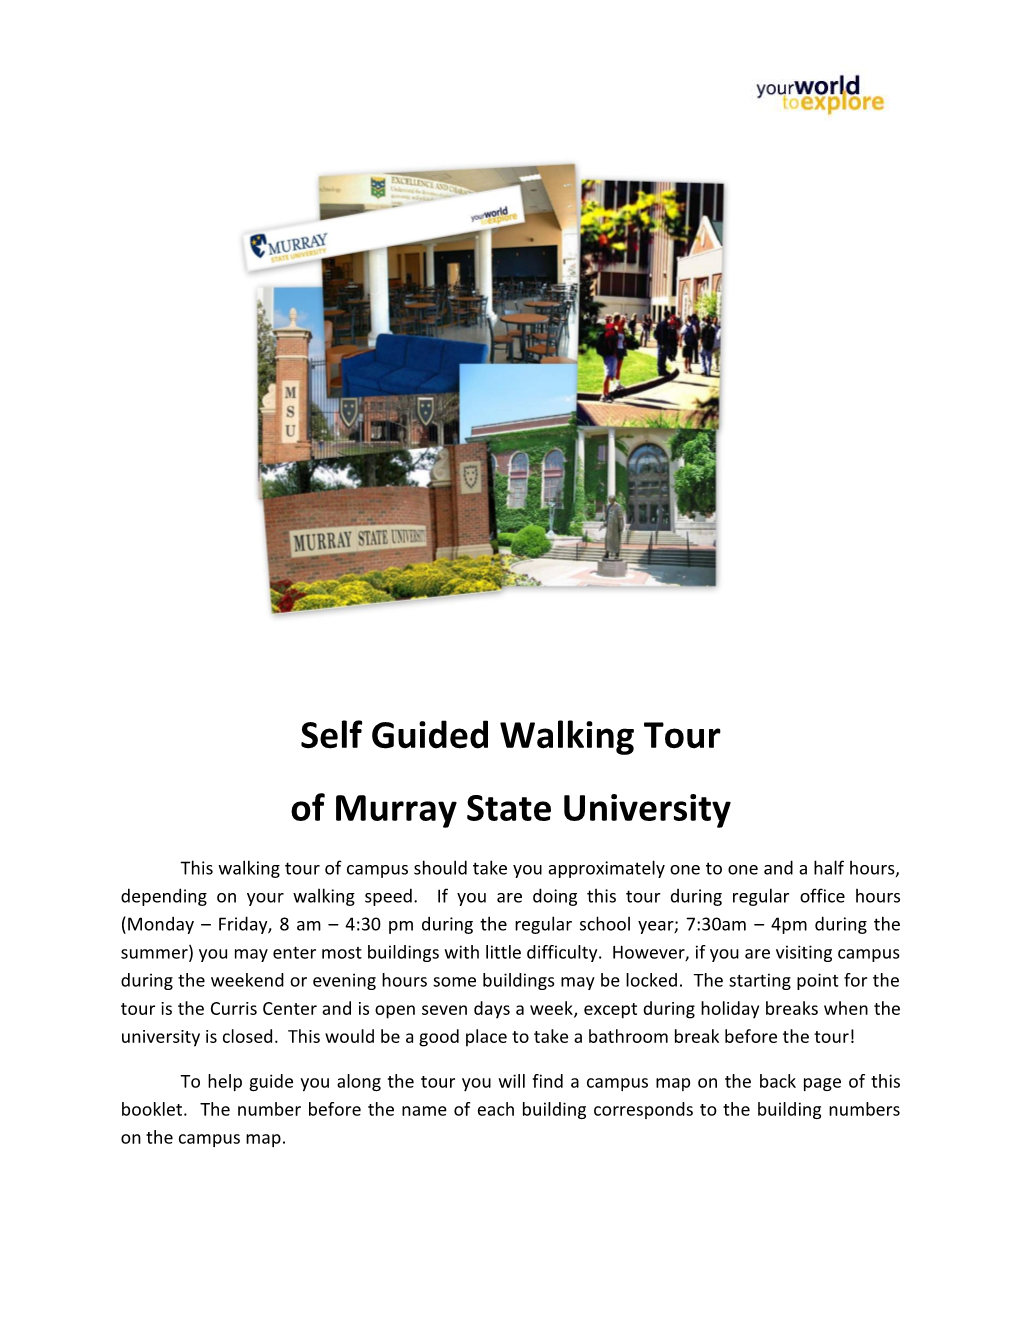 Self Guided Walking Tour of Murray State University